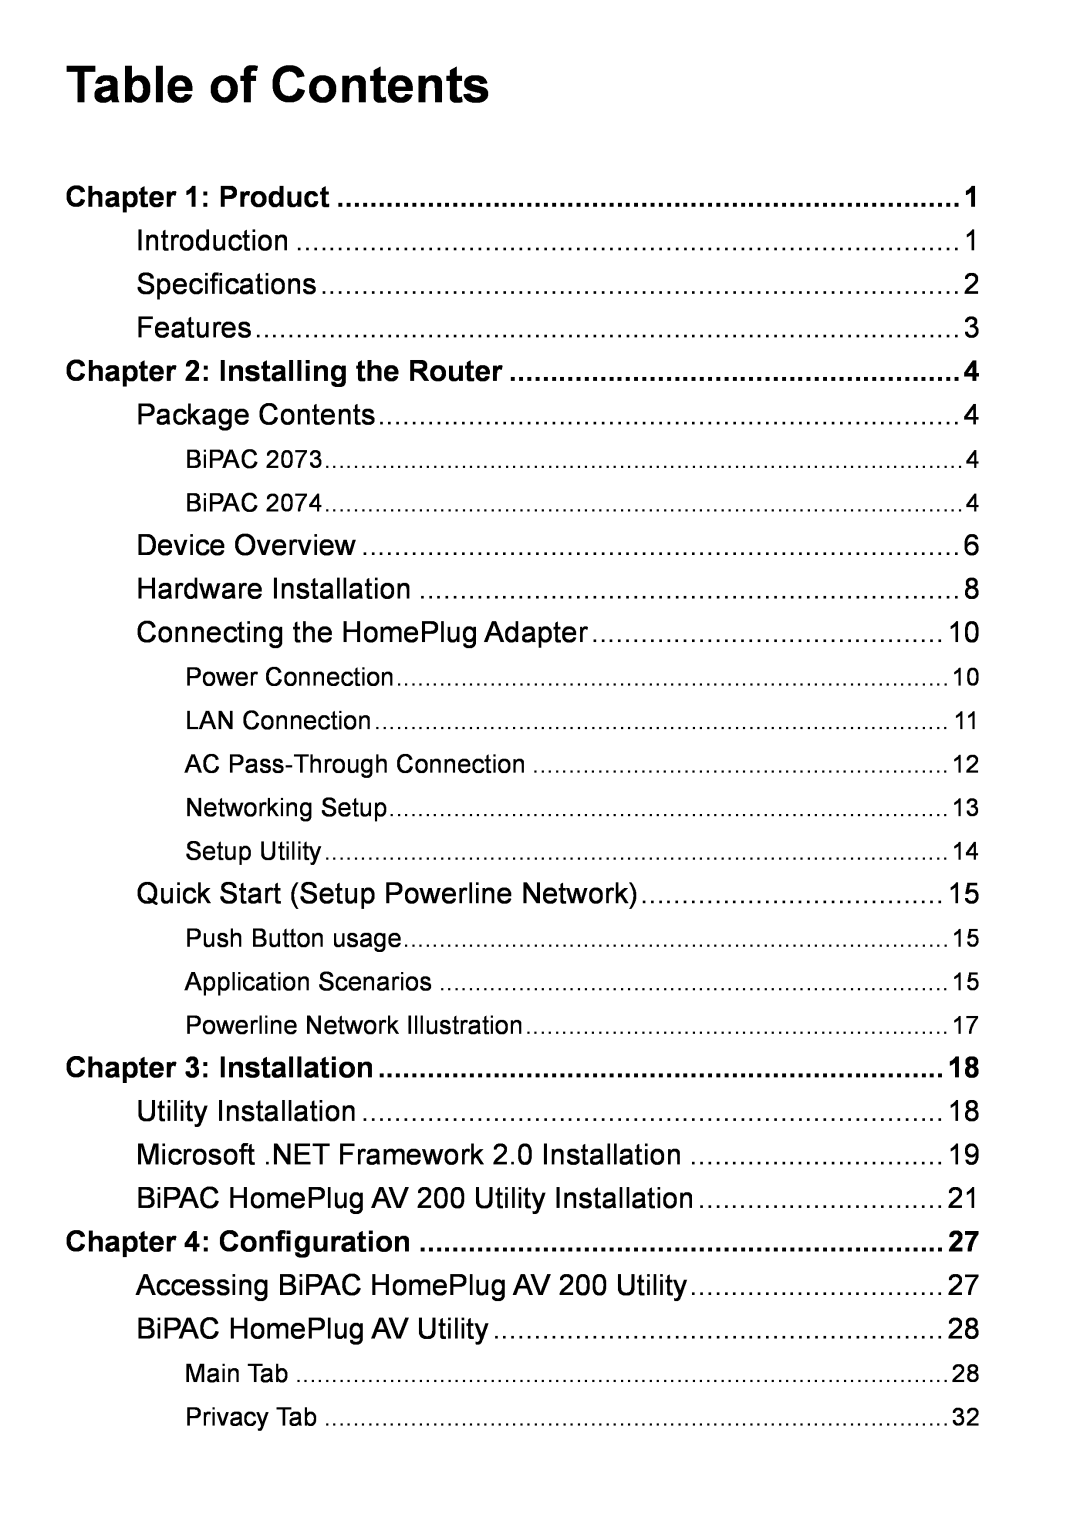 Billion Electric Company 2073 user manual Table of Contents, Installation, Configuration 